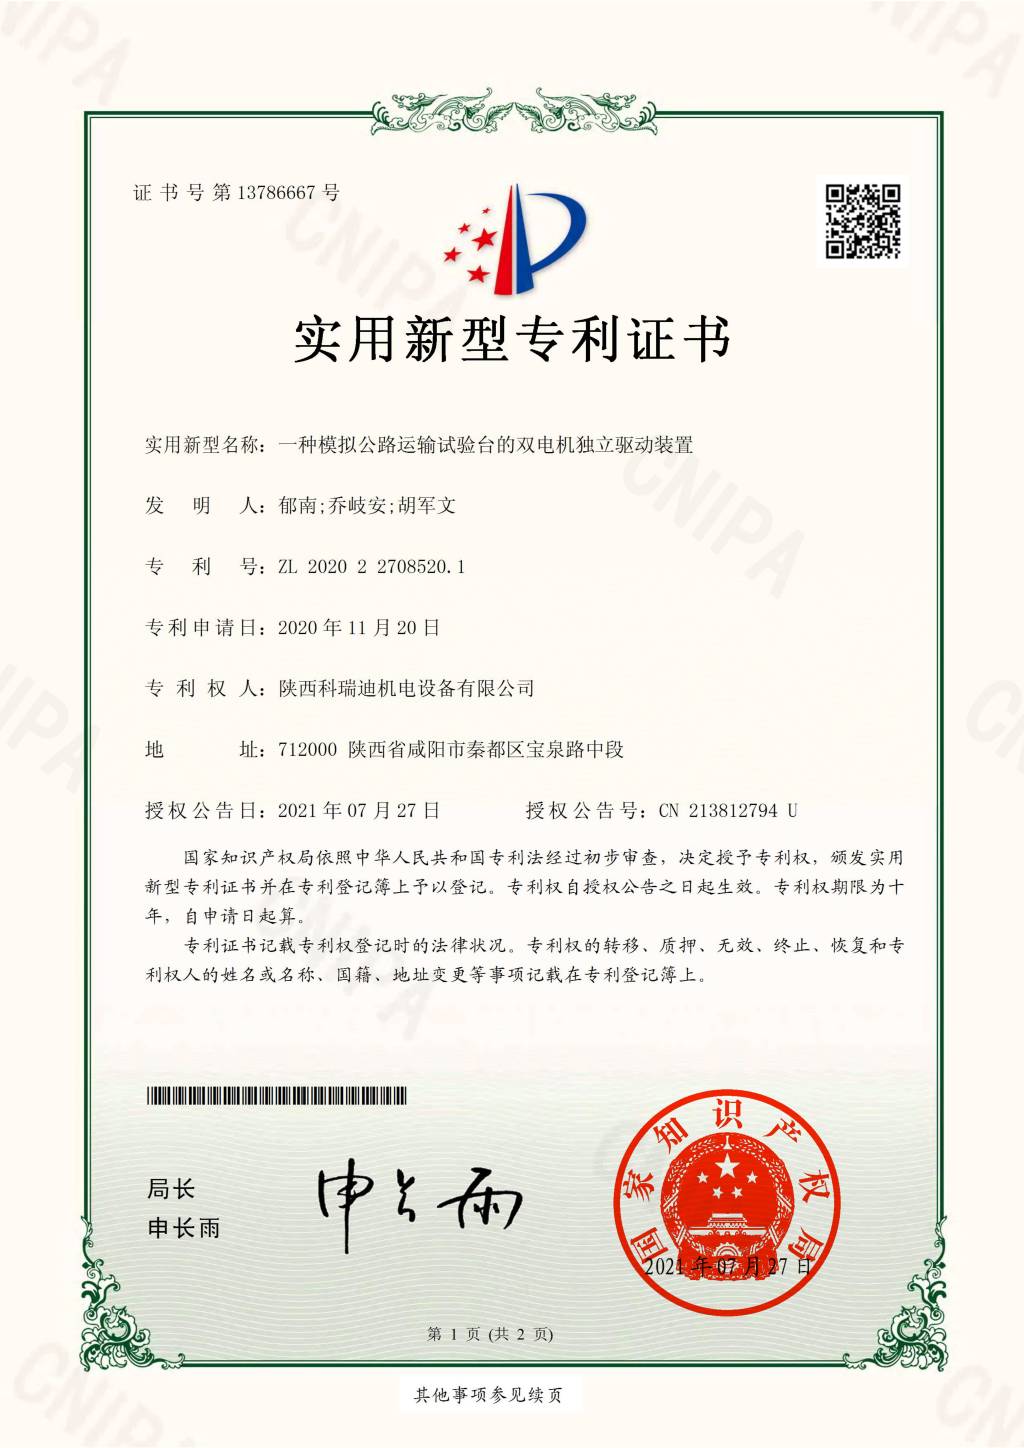 patent right certificate of transport simulation test machine